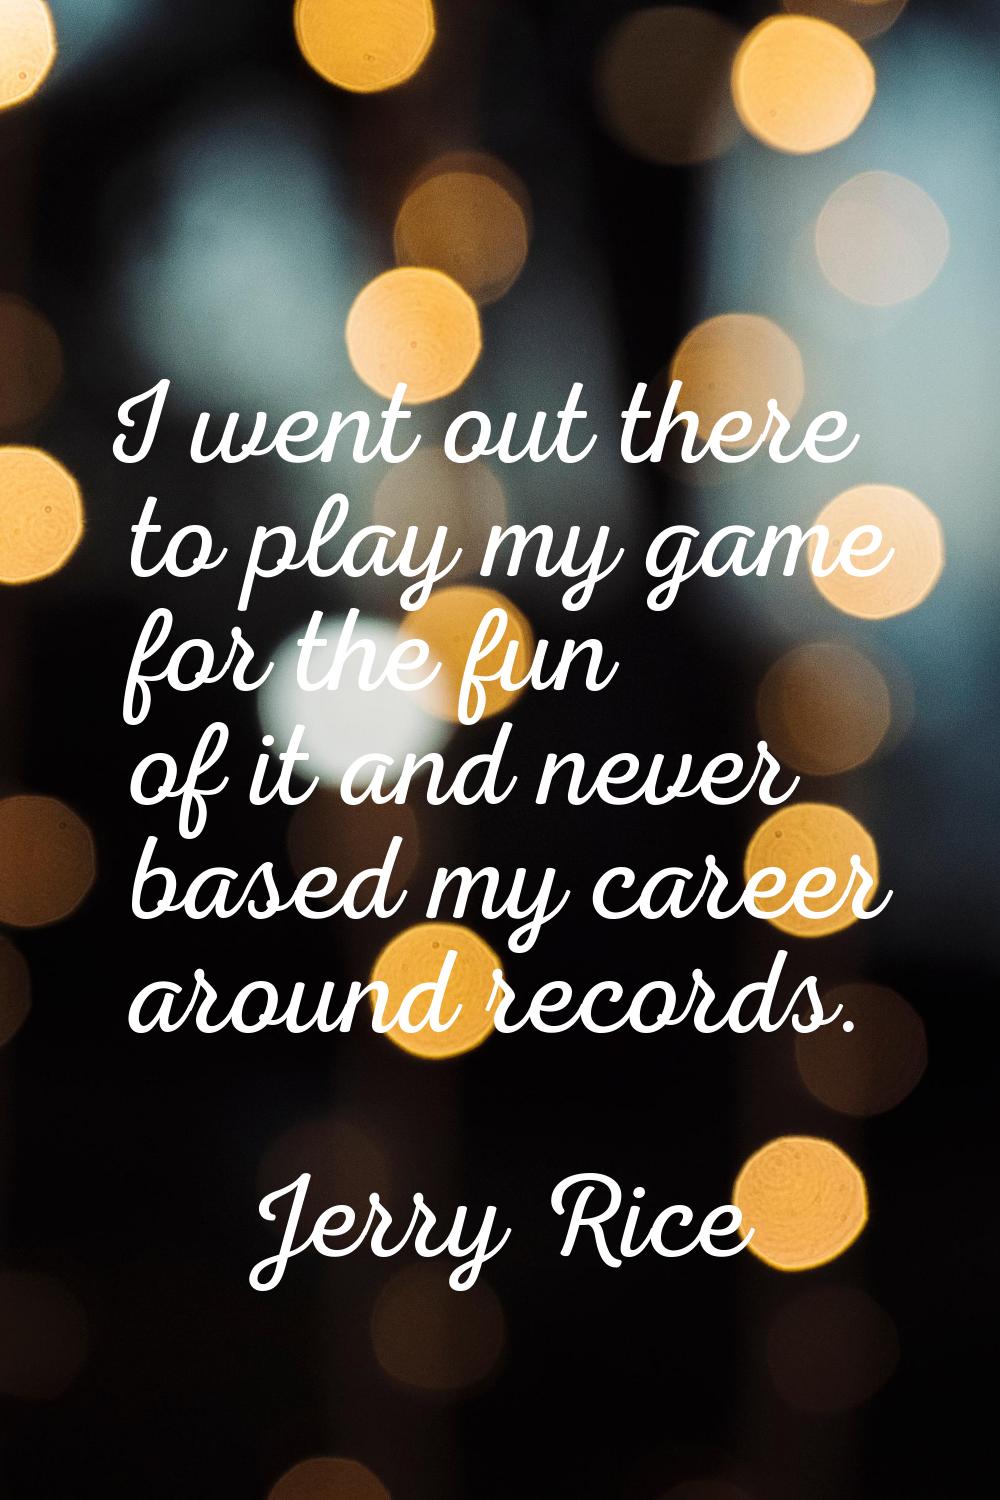 I went out there to play my game for the fun of it and never based my career around records.